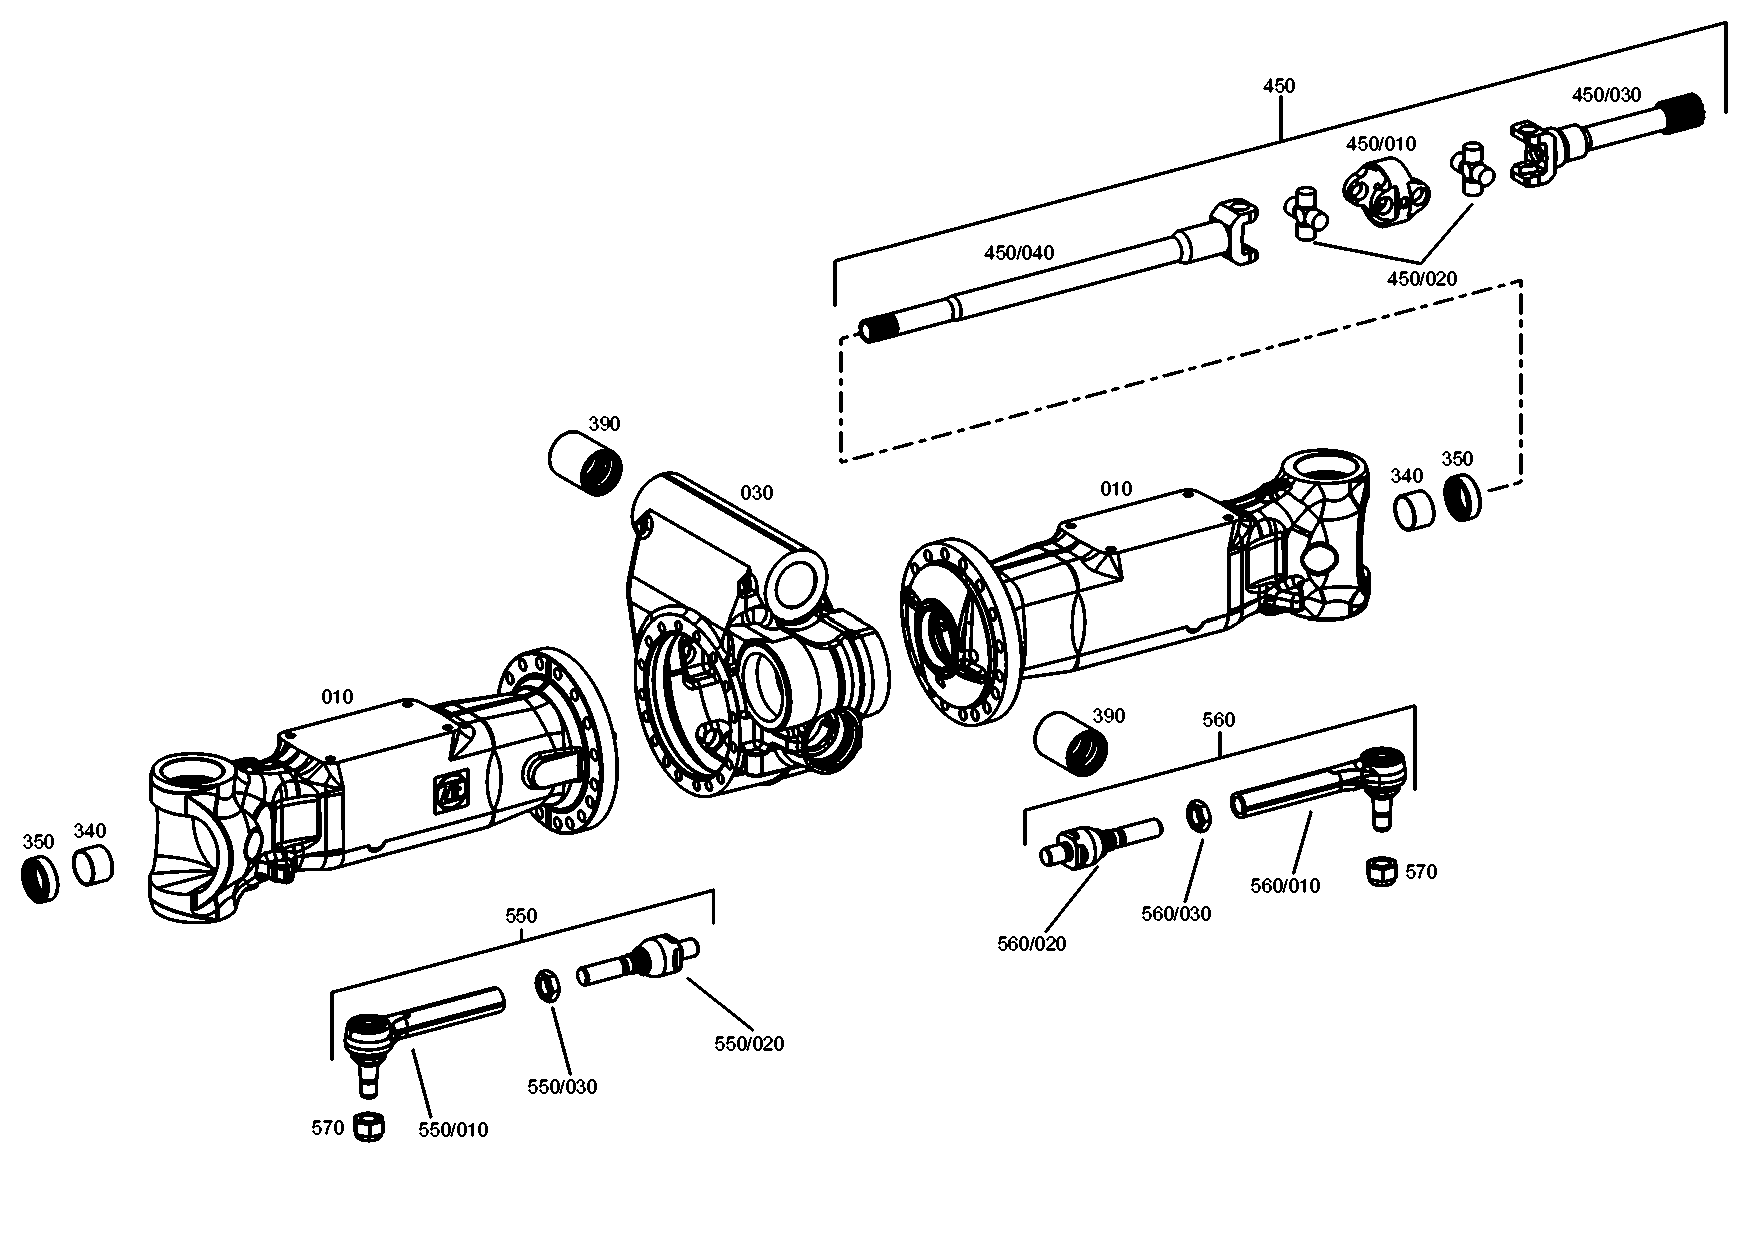 drawing for SENNEBOGEN HYDRAULIKBAGGER GMBH 125362 - AXLE DRIVE HOUSING (figure 4)